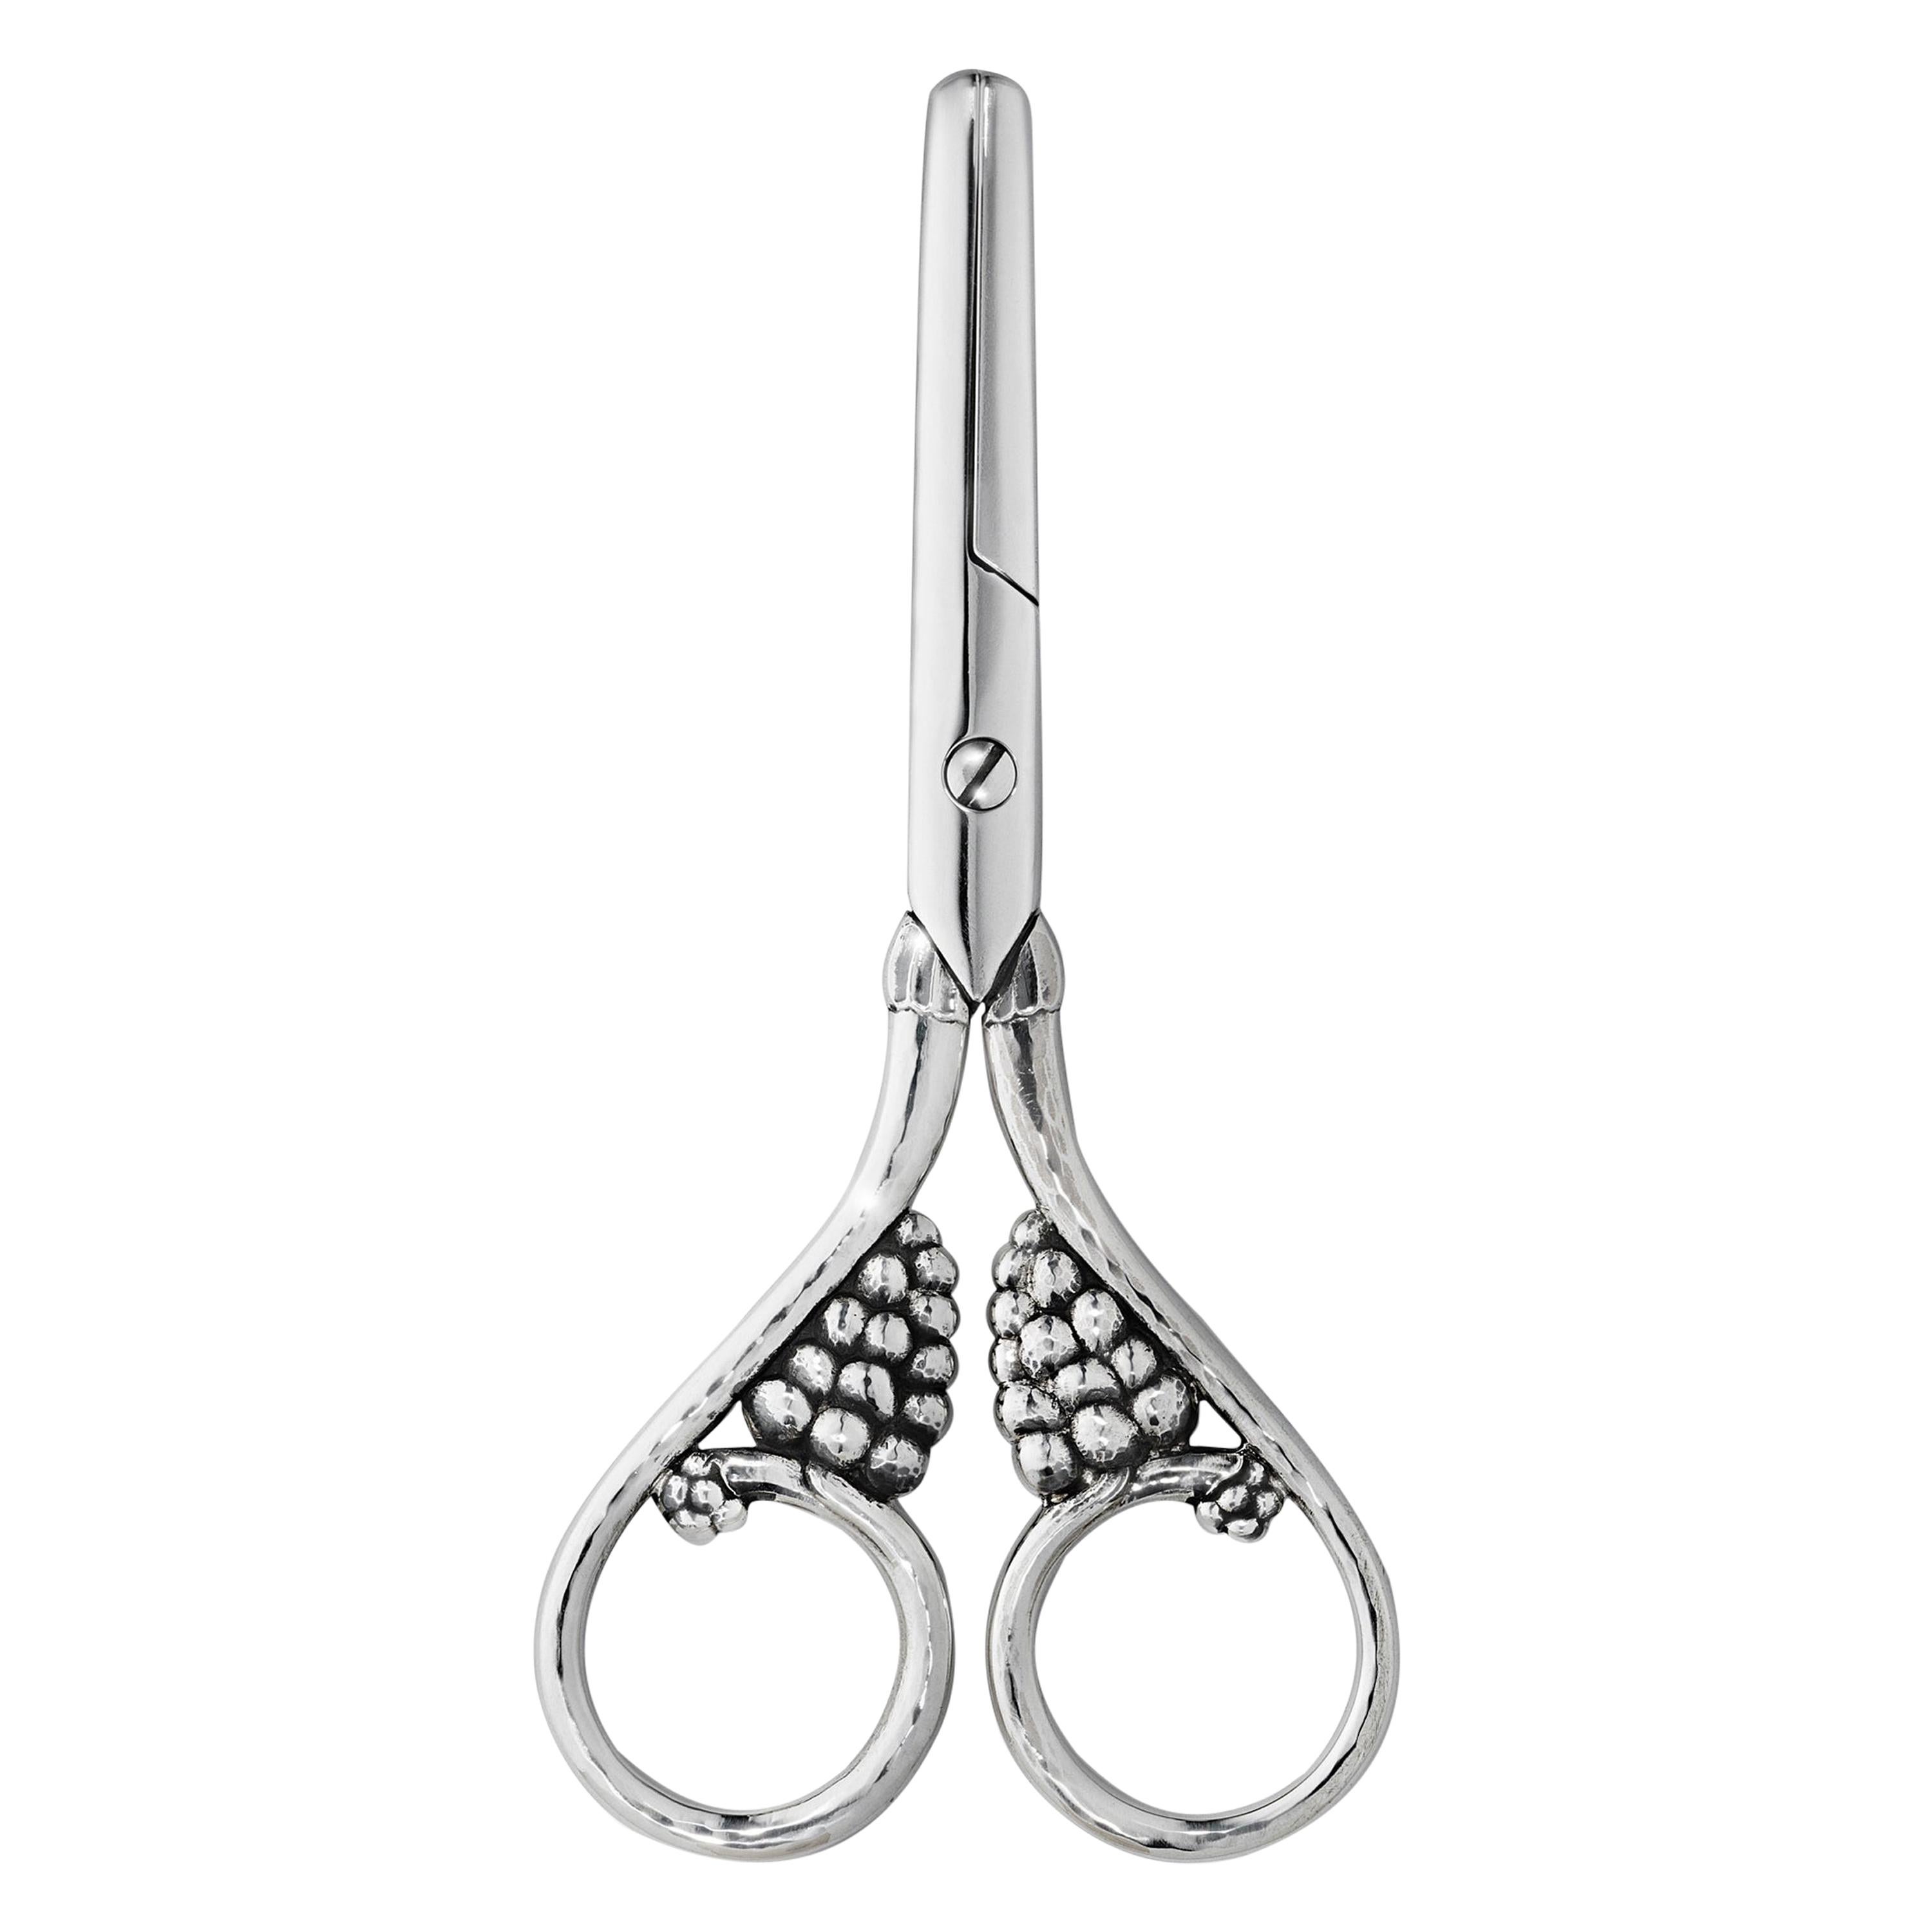 Georg Jensen 139B Handcrafted Sterling Silver Grape Scissors with Steel Blade For Sale